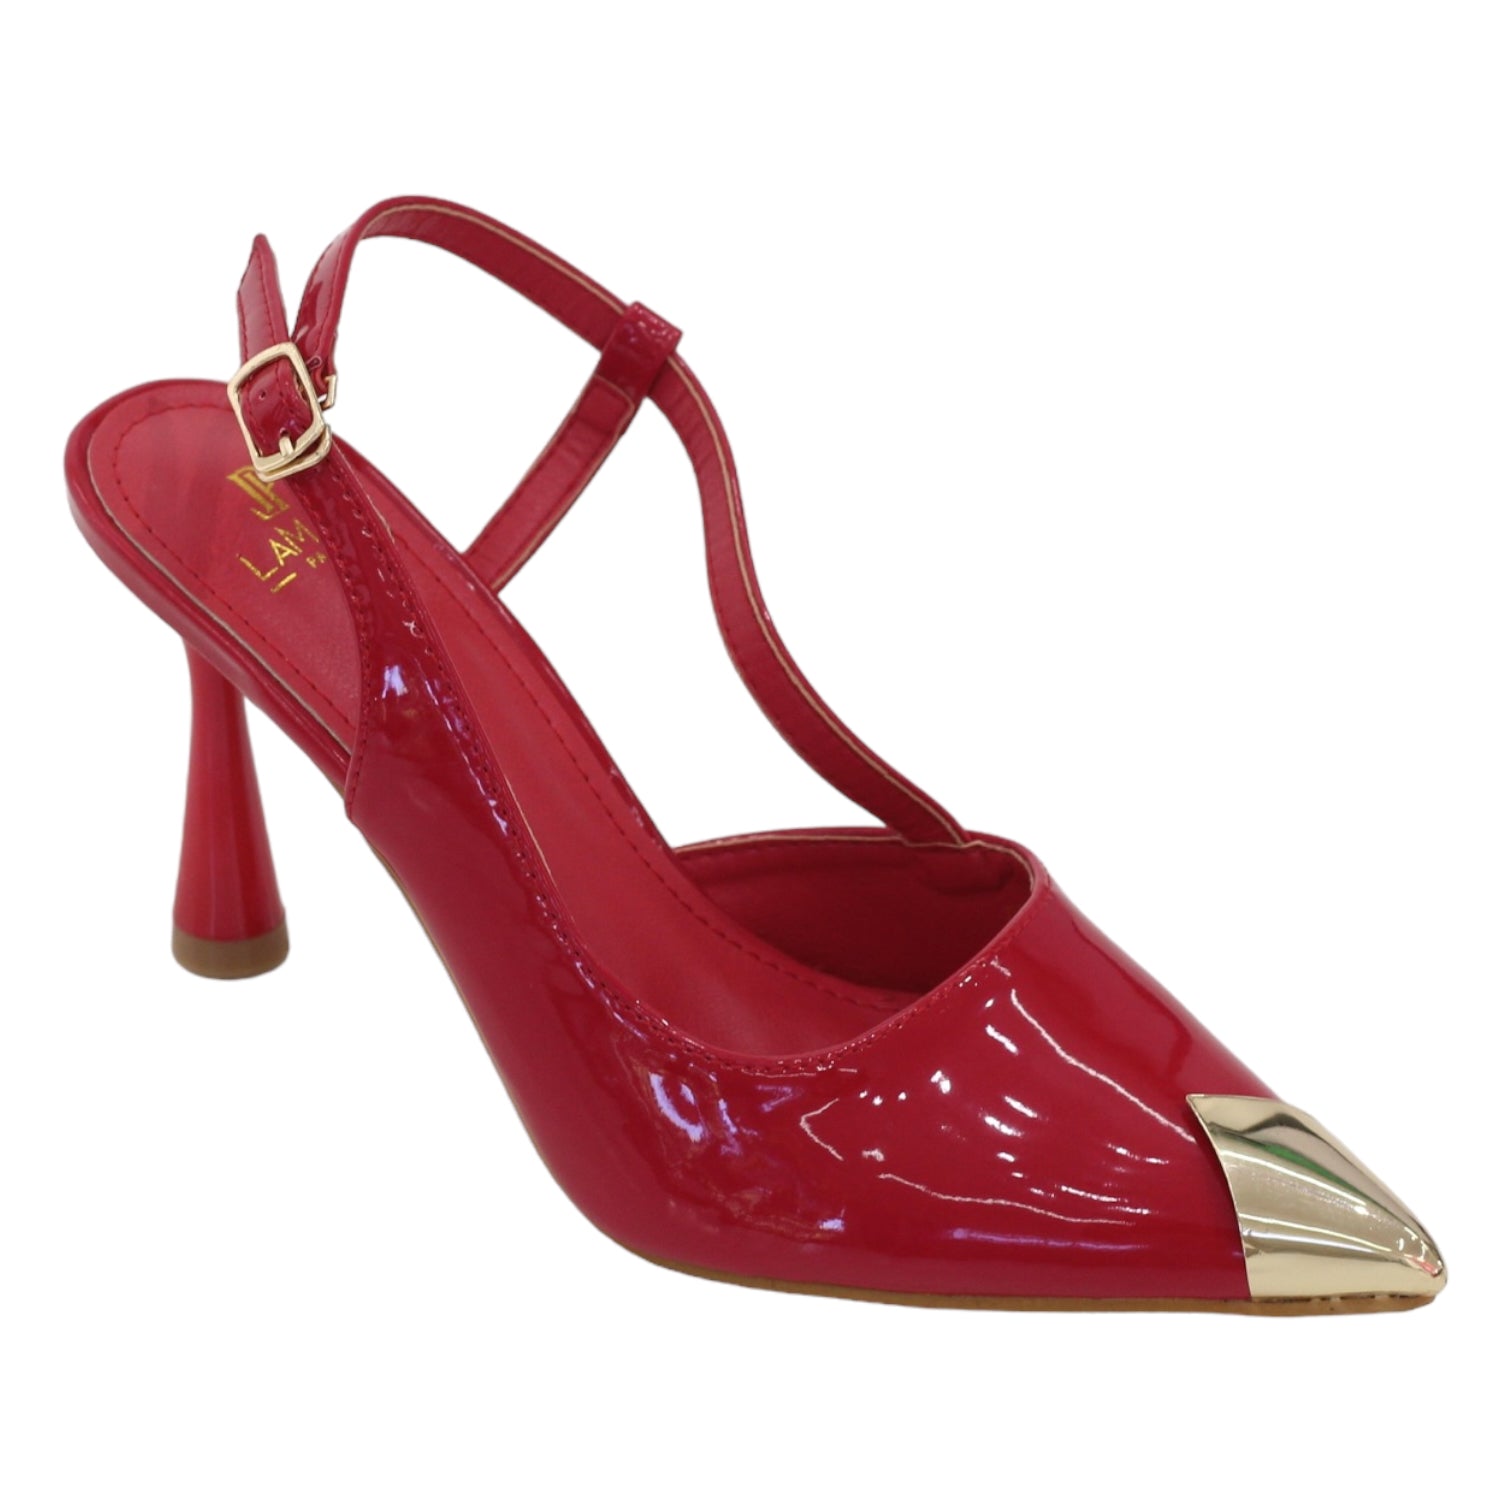 Red 8.5cm heel pat sling back with gold pointy toe obella